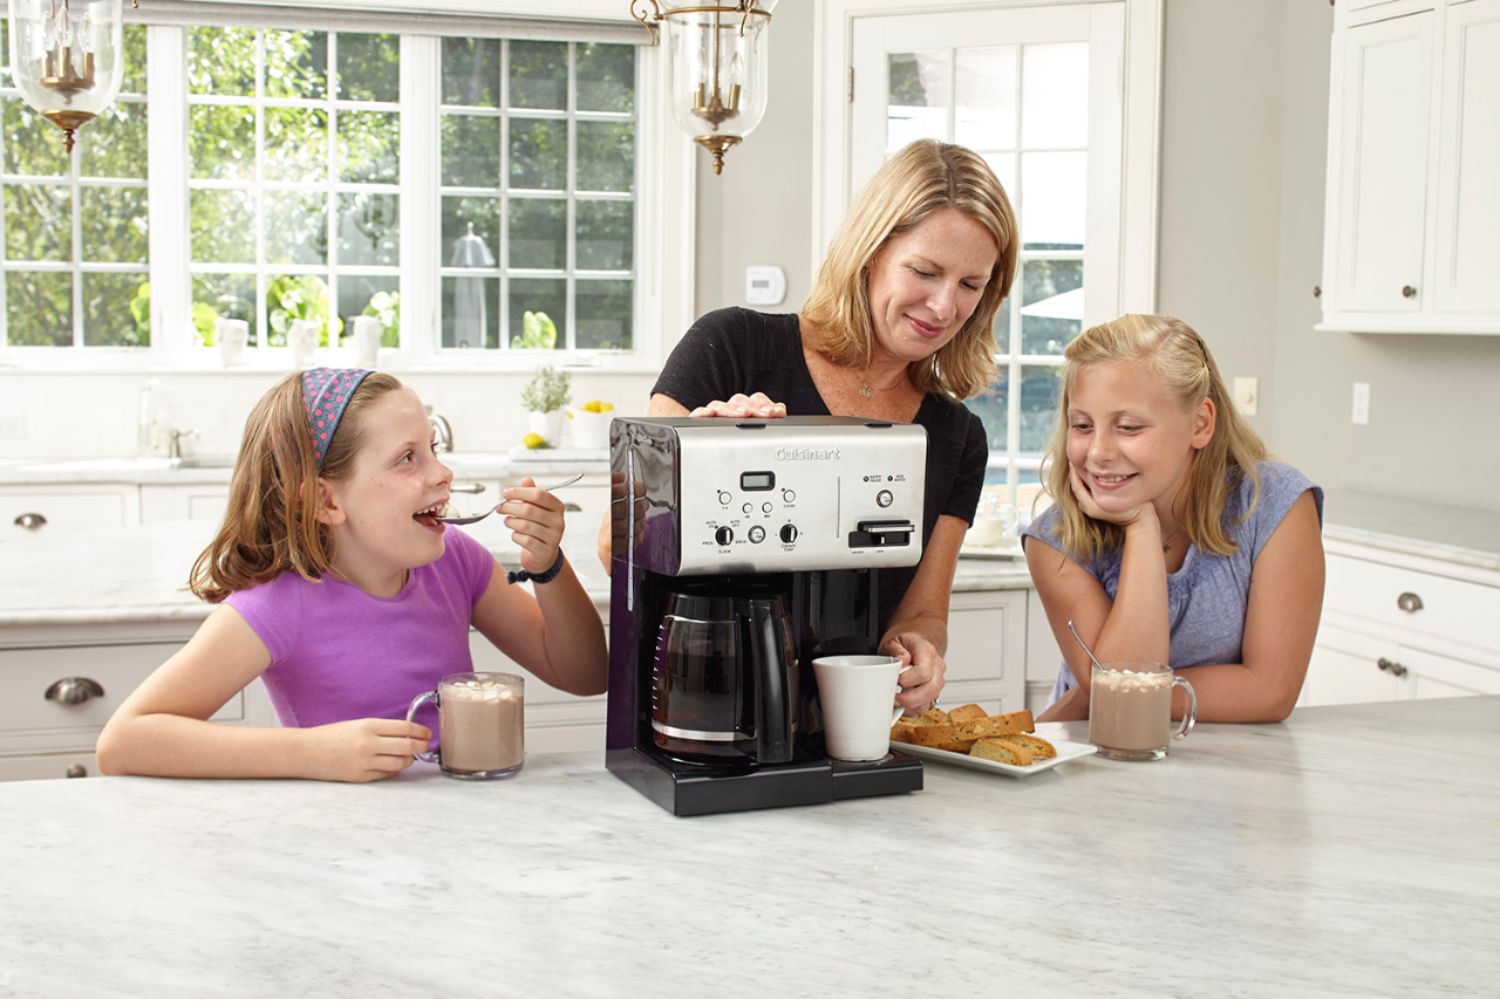 Cuisinart COFFEE PLUS 12-Cup Black Drip Coffee Maker with Automatic Shut-Off  CHW-12P1 - The Home Depot